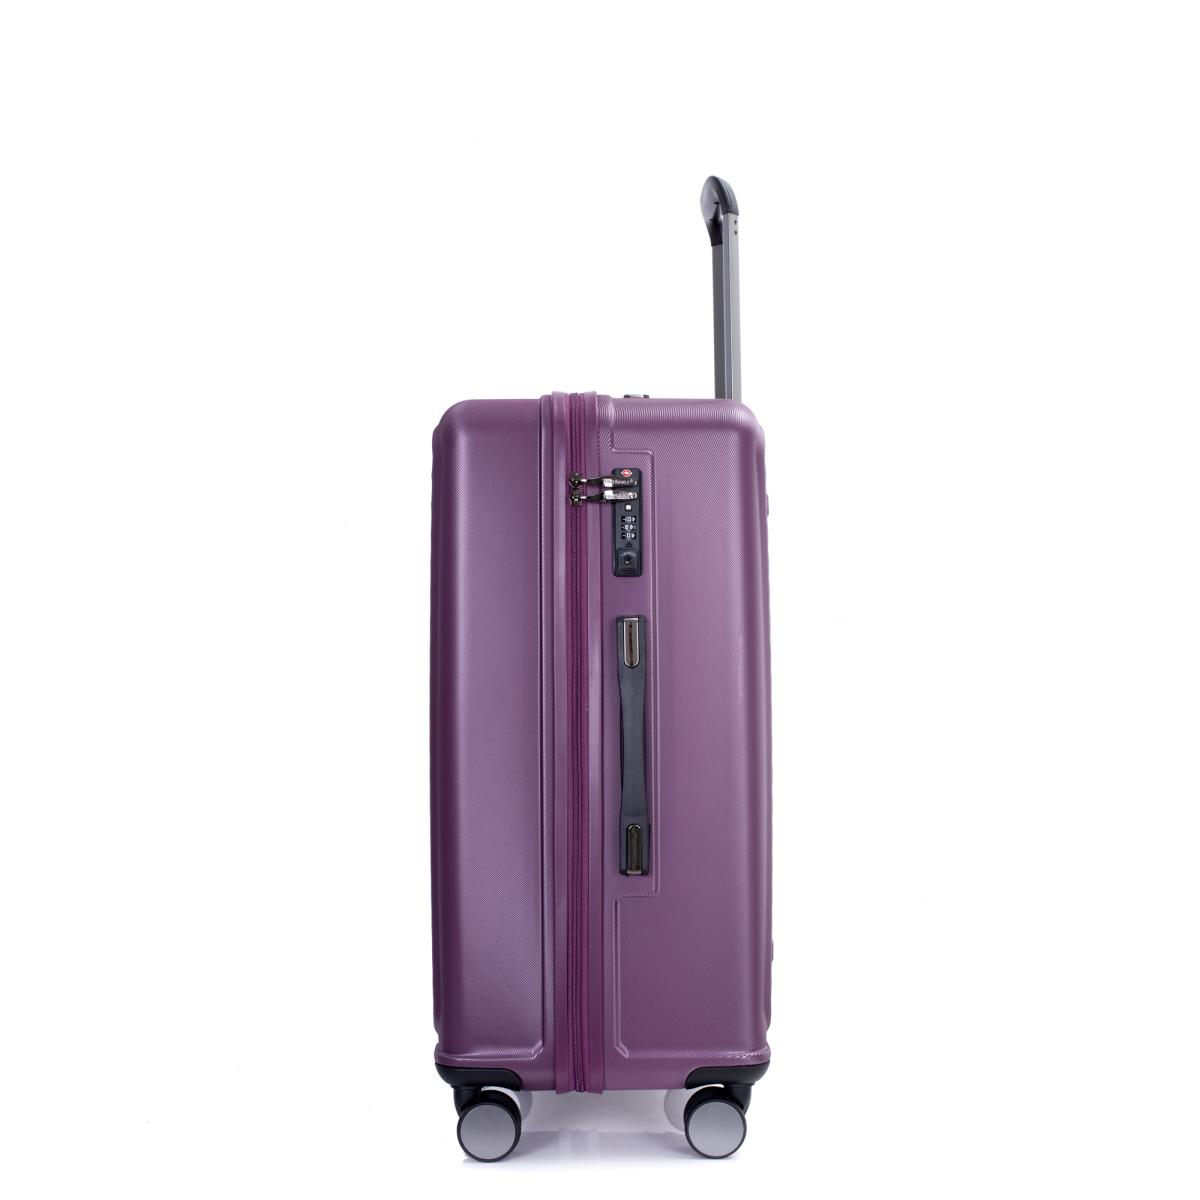 3 Piece Luggage Sets Pc+abs Lightweight Suitcase with Two Hooks, 360° Double Spinner Wheels, Tsa Lock, (21/25/29) Dark Purple